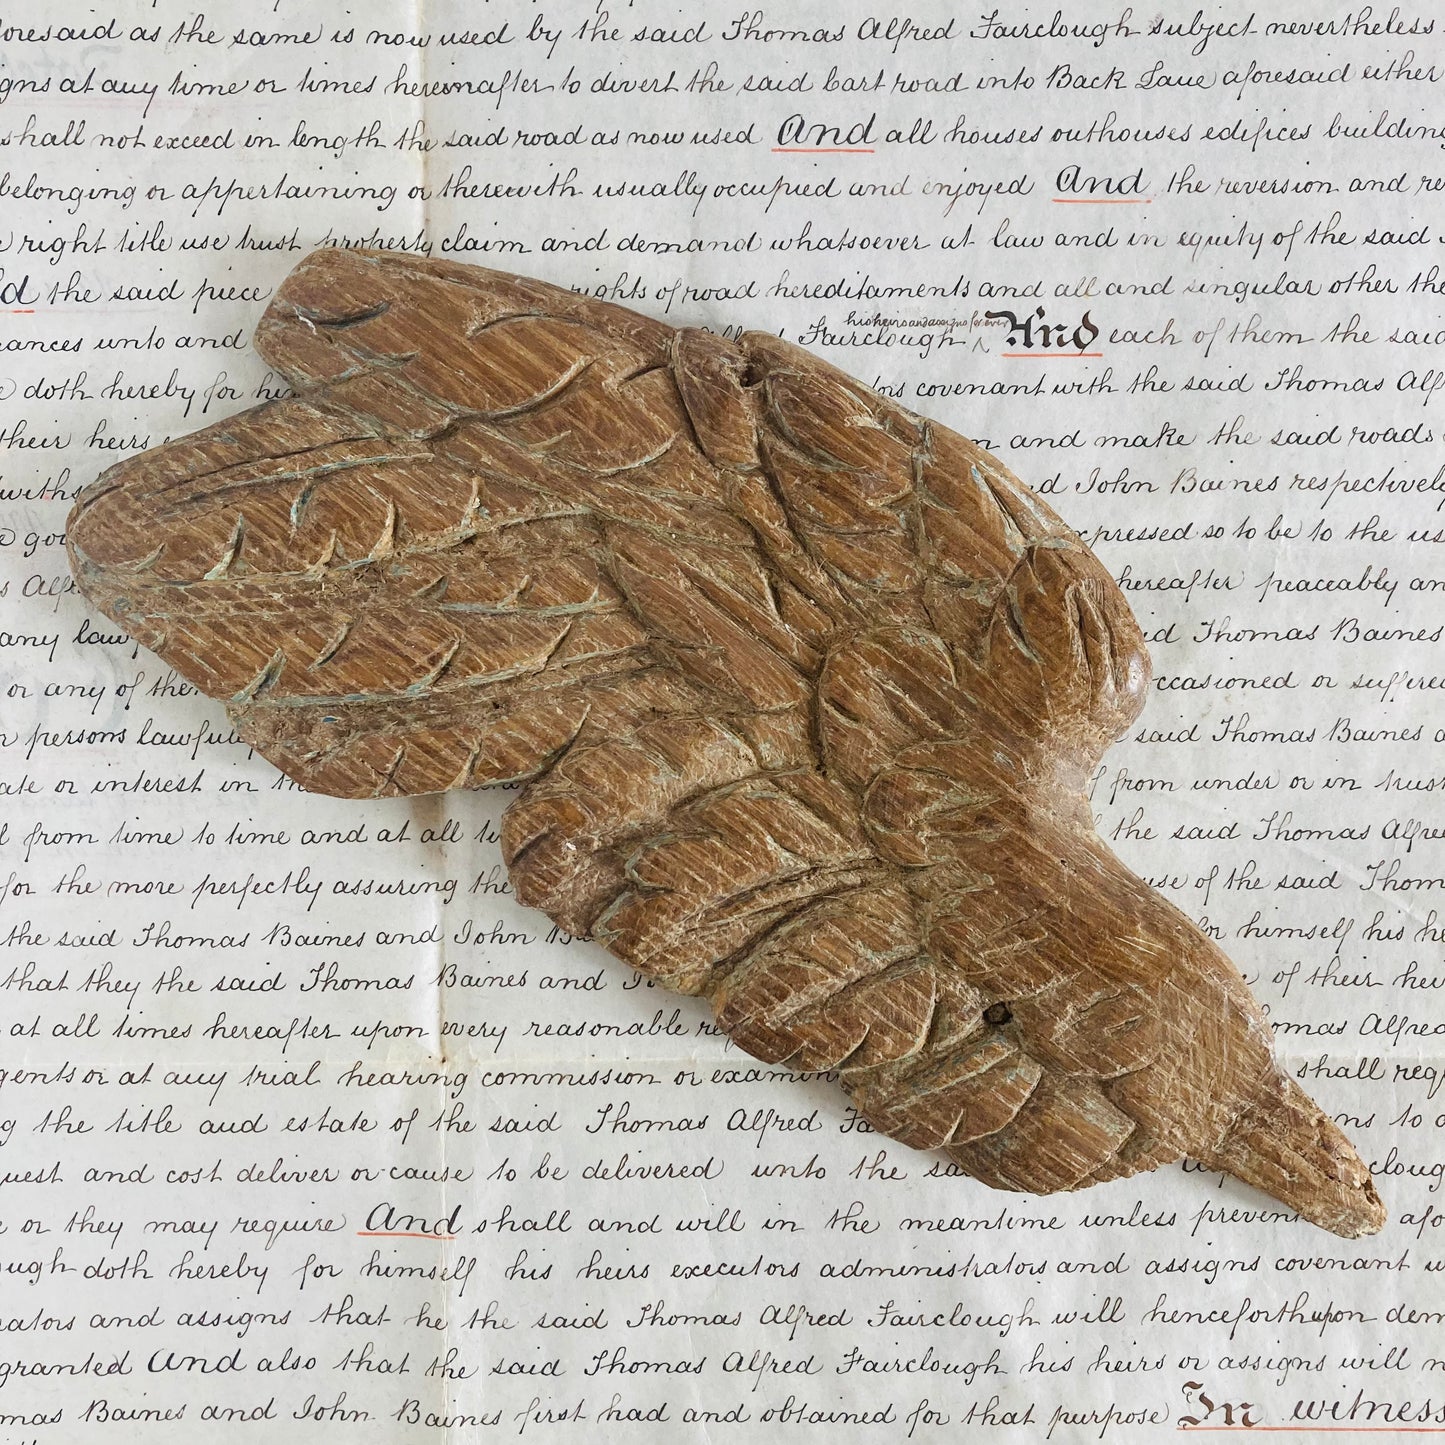 Antique Angel Wing Decorative Salvage Wooden Fragment For Decor Styling